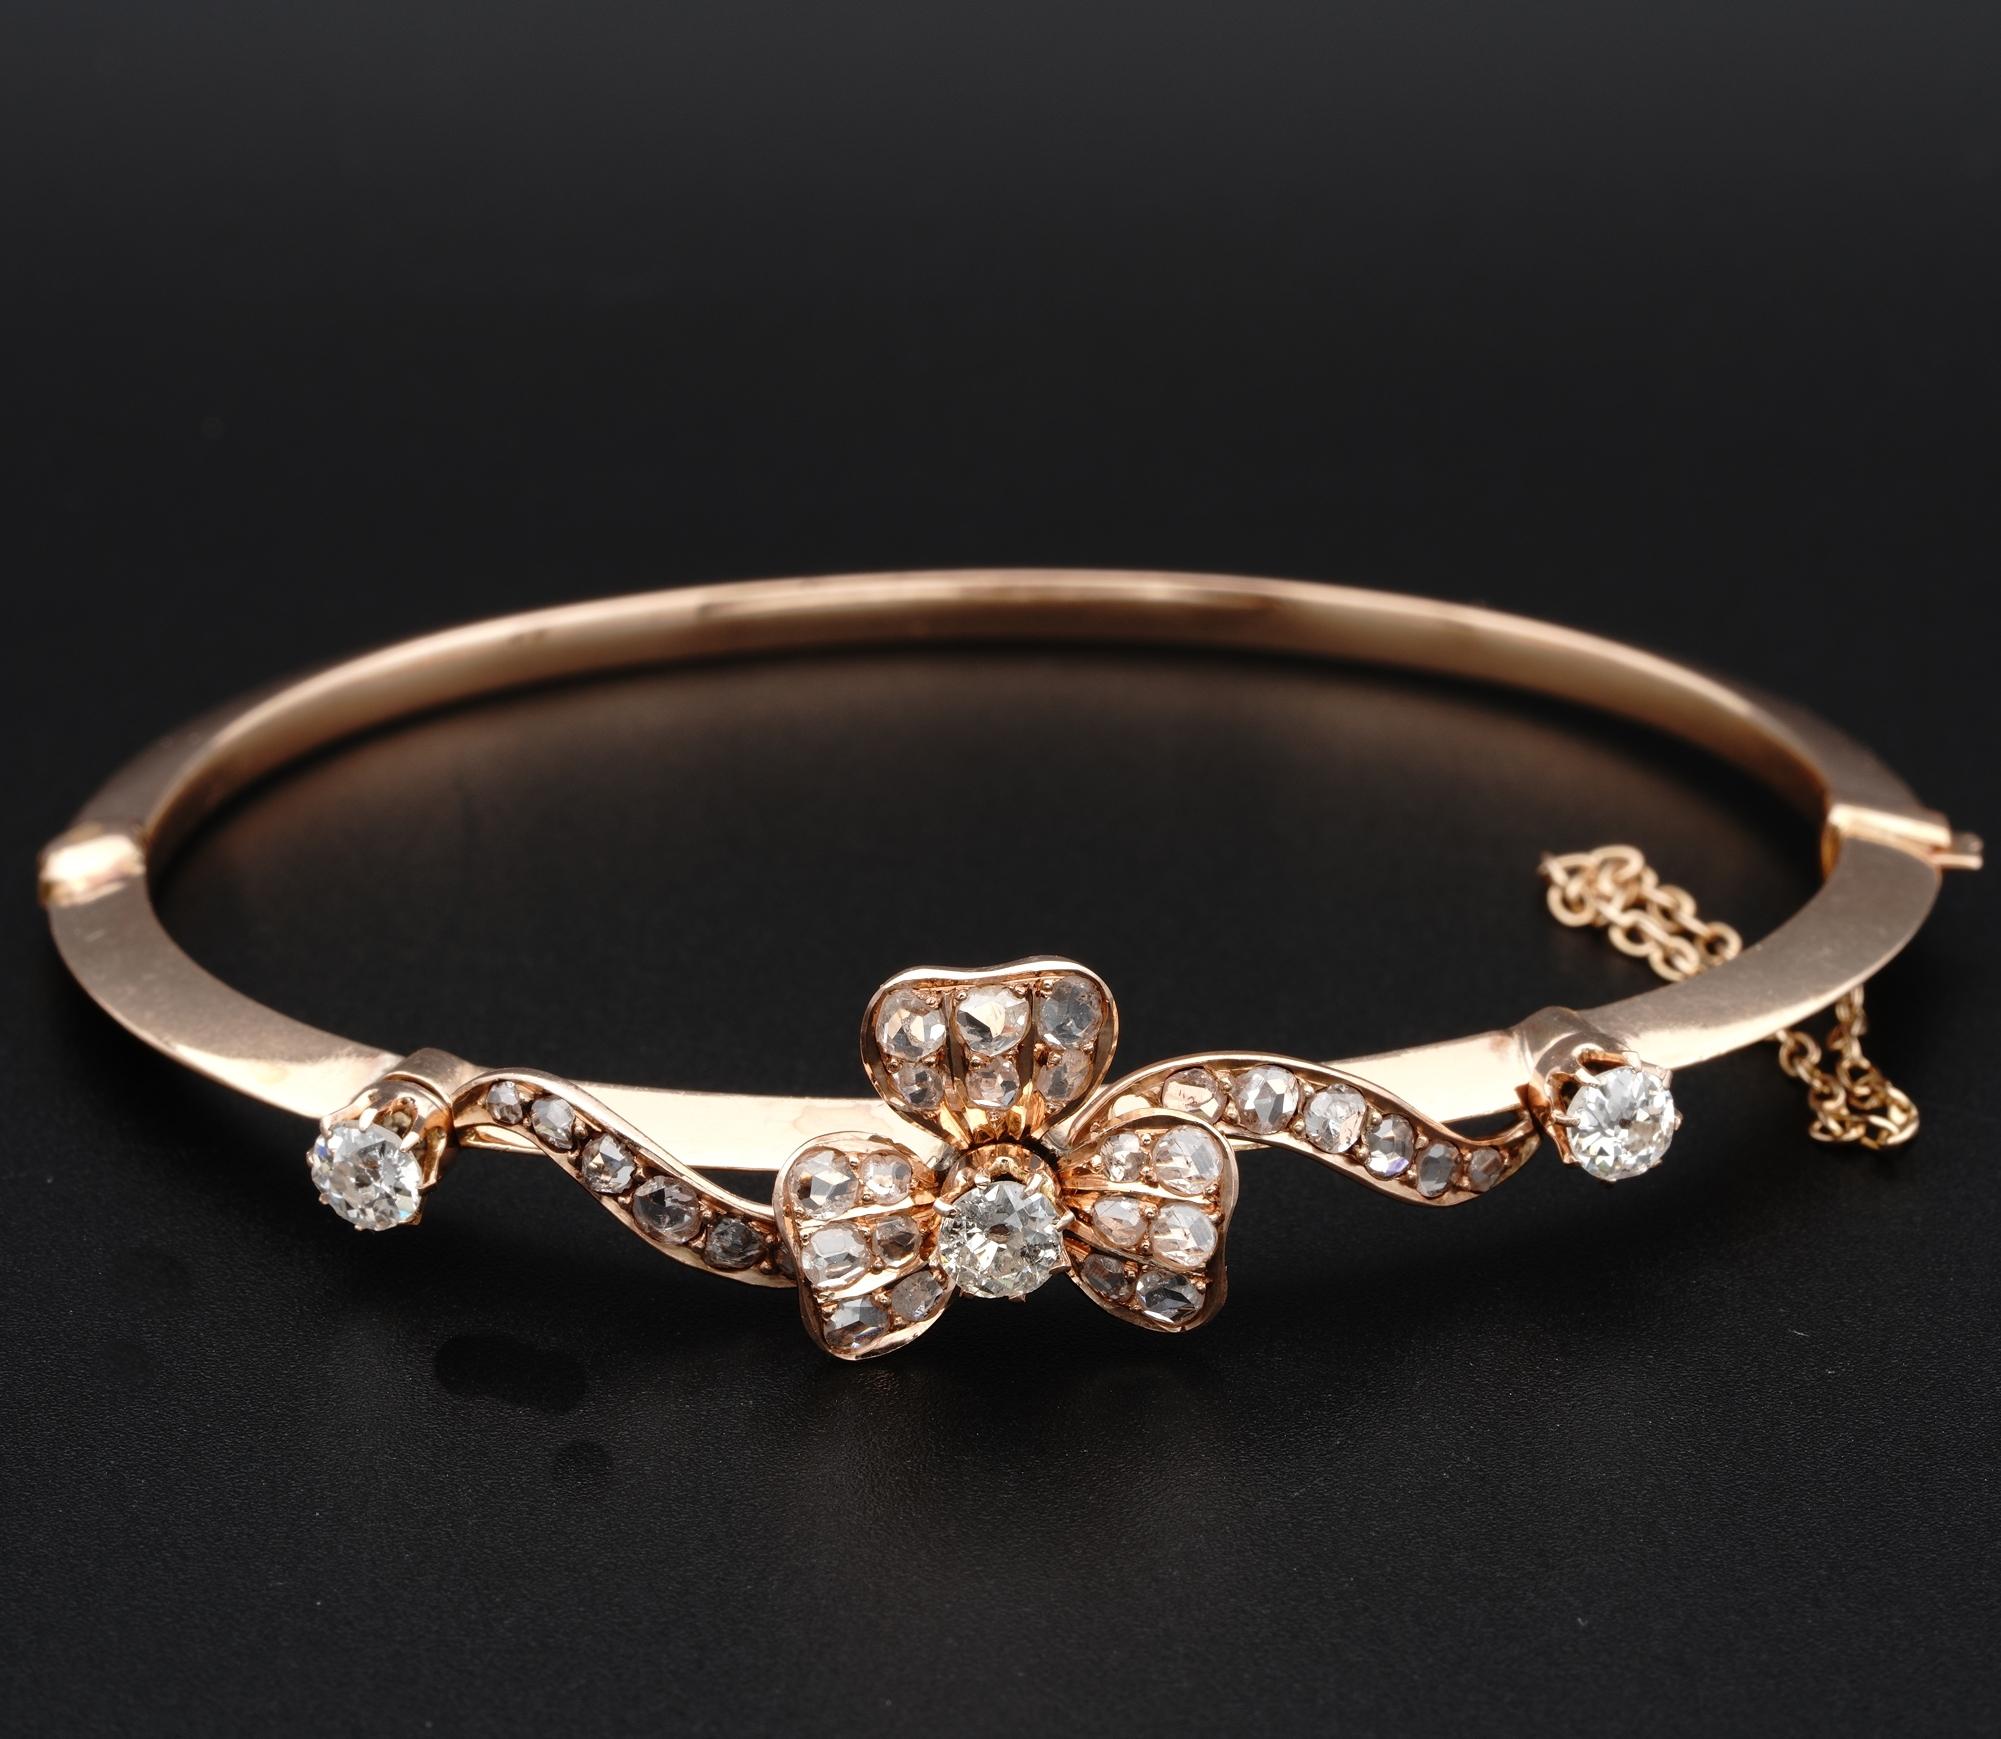 Victorian beautiful Diamond bangle, 18 KT solid gold crafted, 1880 ca
Gorgeously hand made in the shape of Shamrock as symbol of good luck embraced in a twisted motif
Set throughout with 2.40 Ct TCW of Diamonds between rose cut Diamonds and old mine